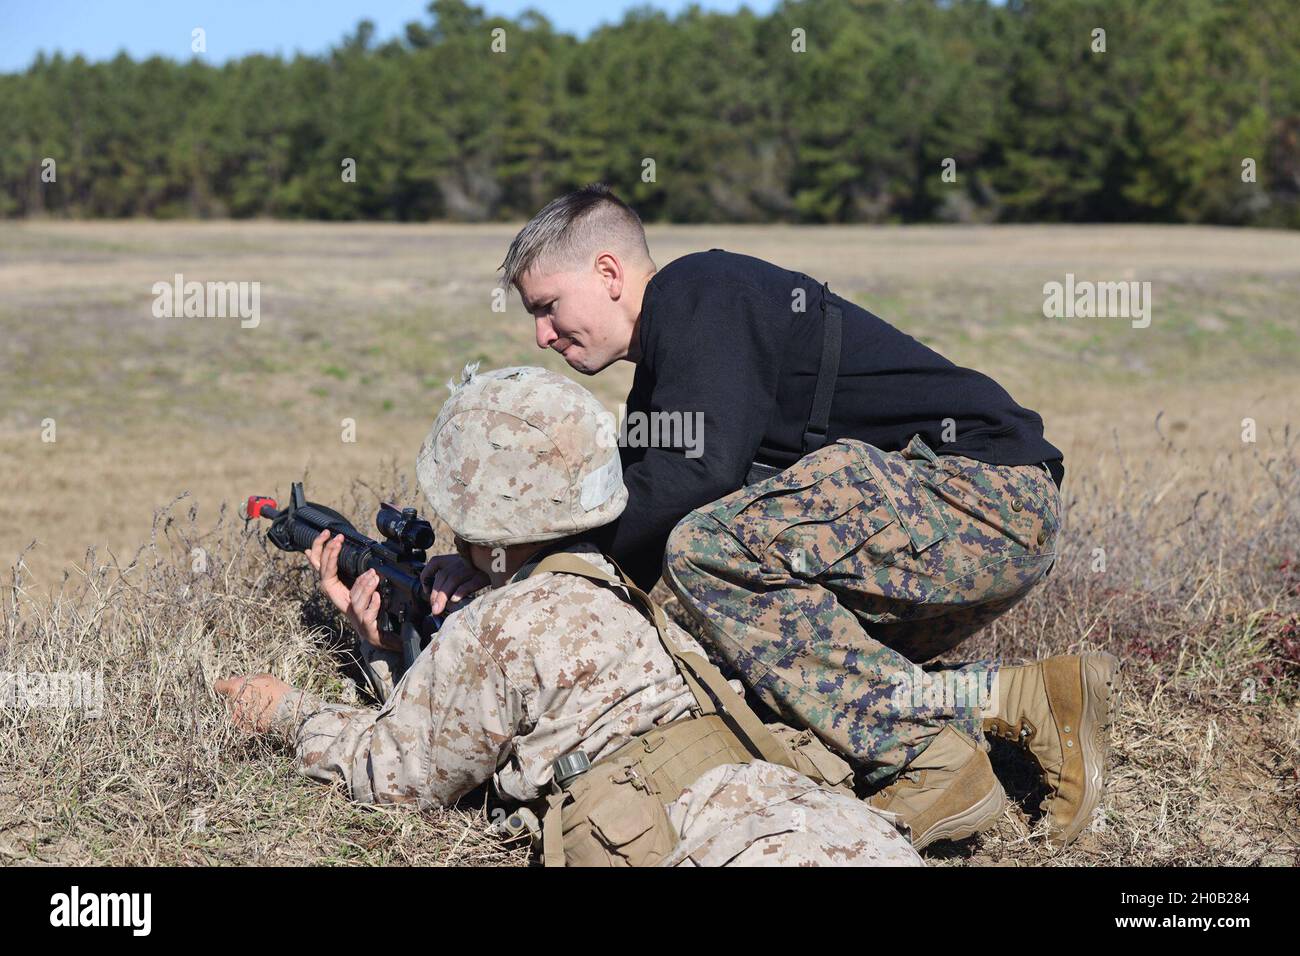 Sgt. Jacob Freeman with Field Training Company, Weapons and Field Training Battalion, performs corrective action on an M16A4 service rifle aboard Marine Corps Recruit Depot Parris Island, S.C., Jan. 14, 2021. Corrective action is used to assist the rifle in loading the rounds correctly. Stock Photo